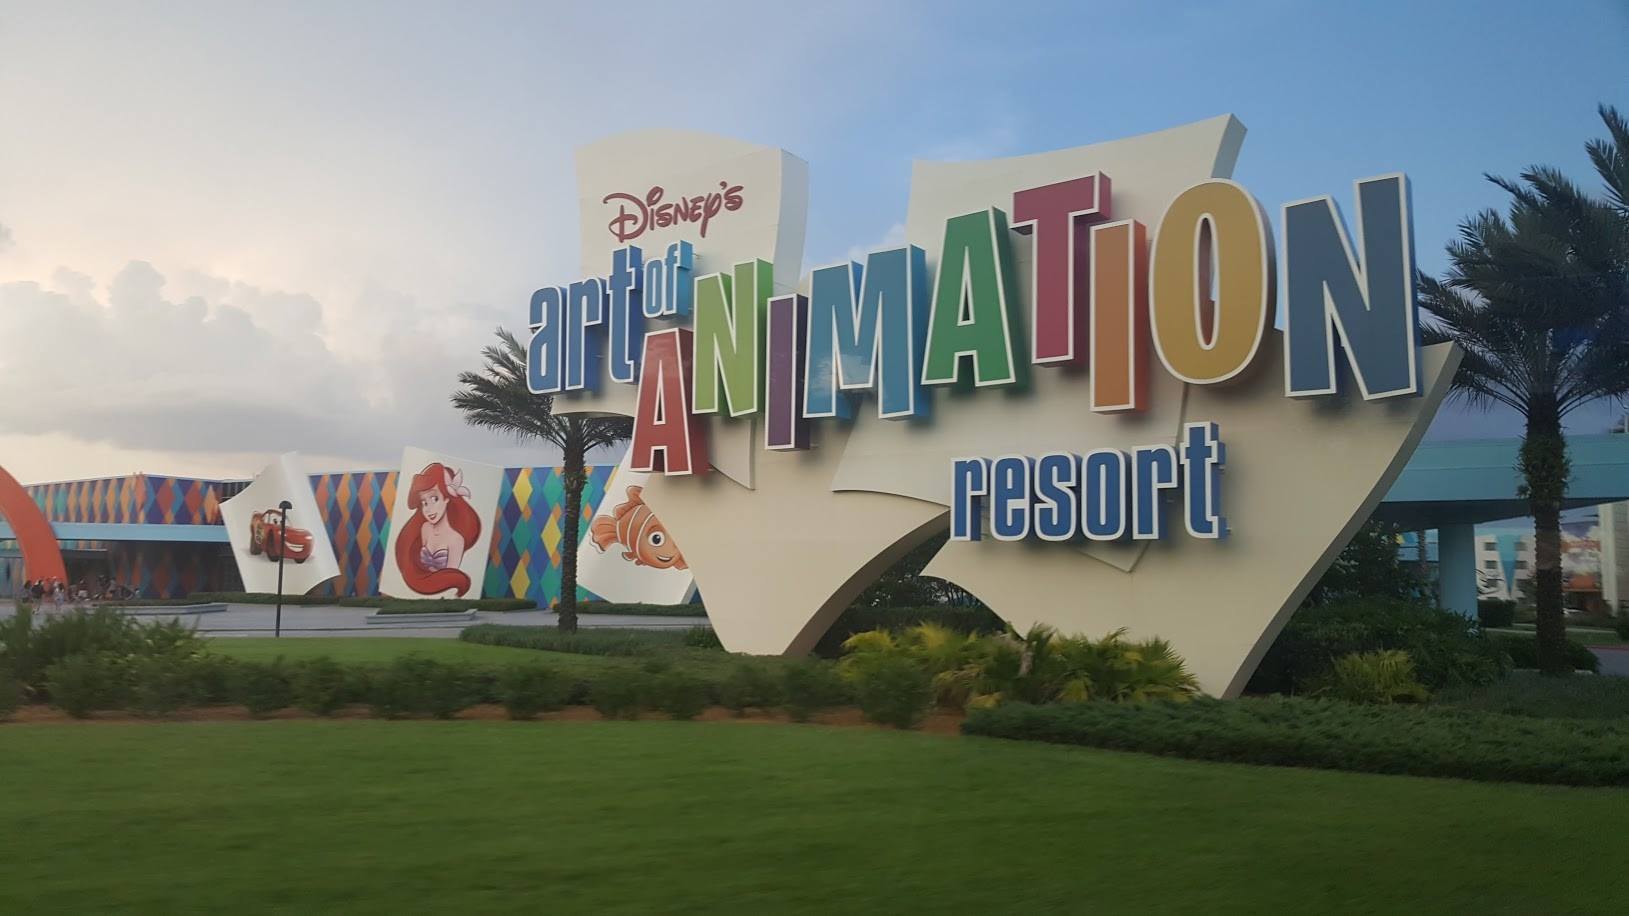 Florida Residents: Save Up to 30% on Rooms at Select Disney Resort Hotels